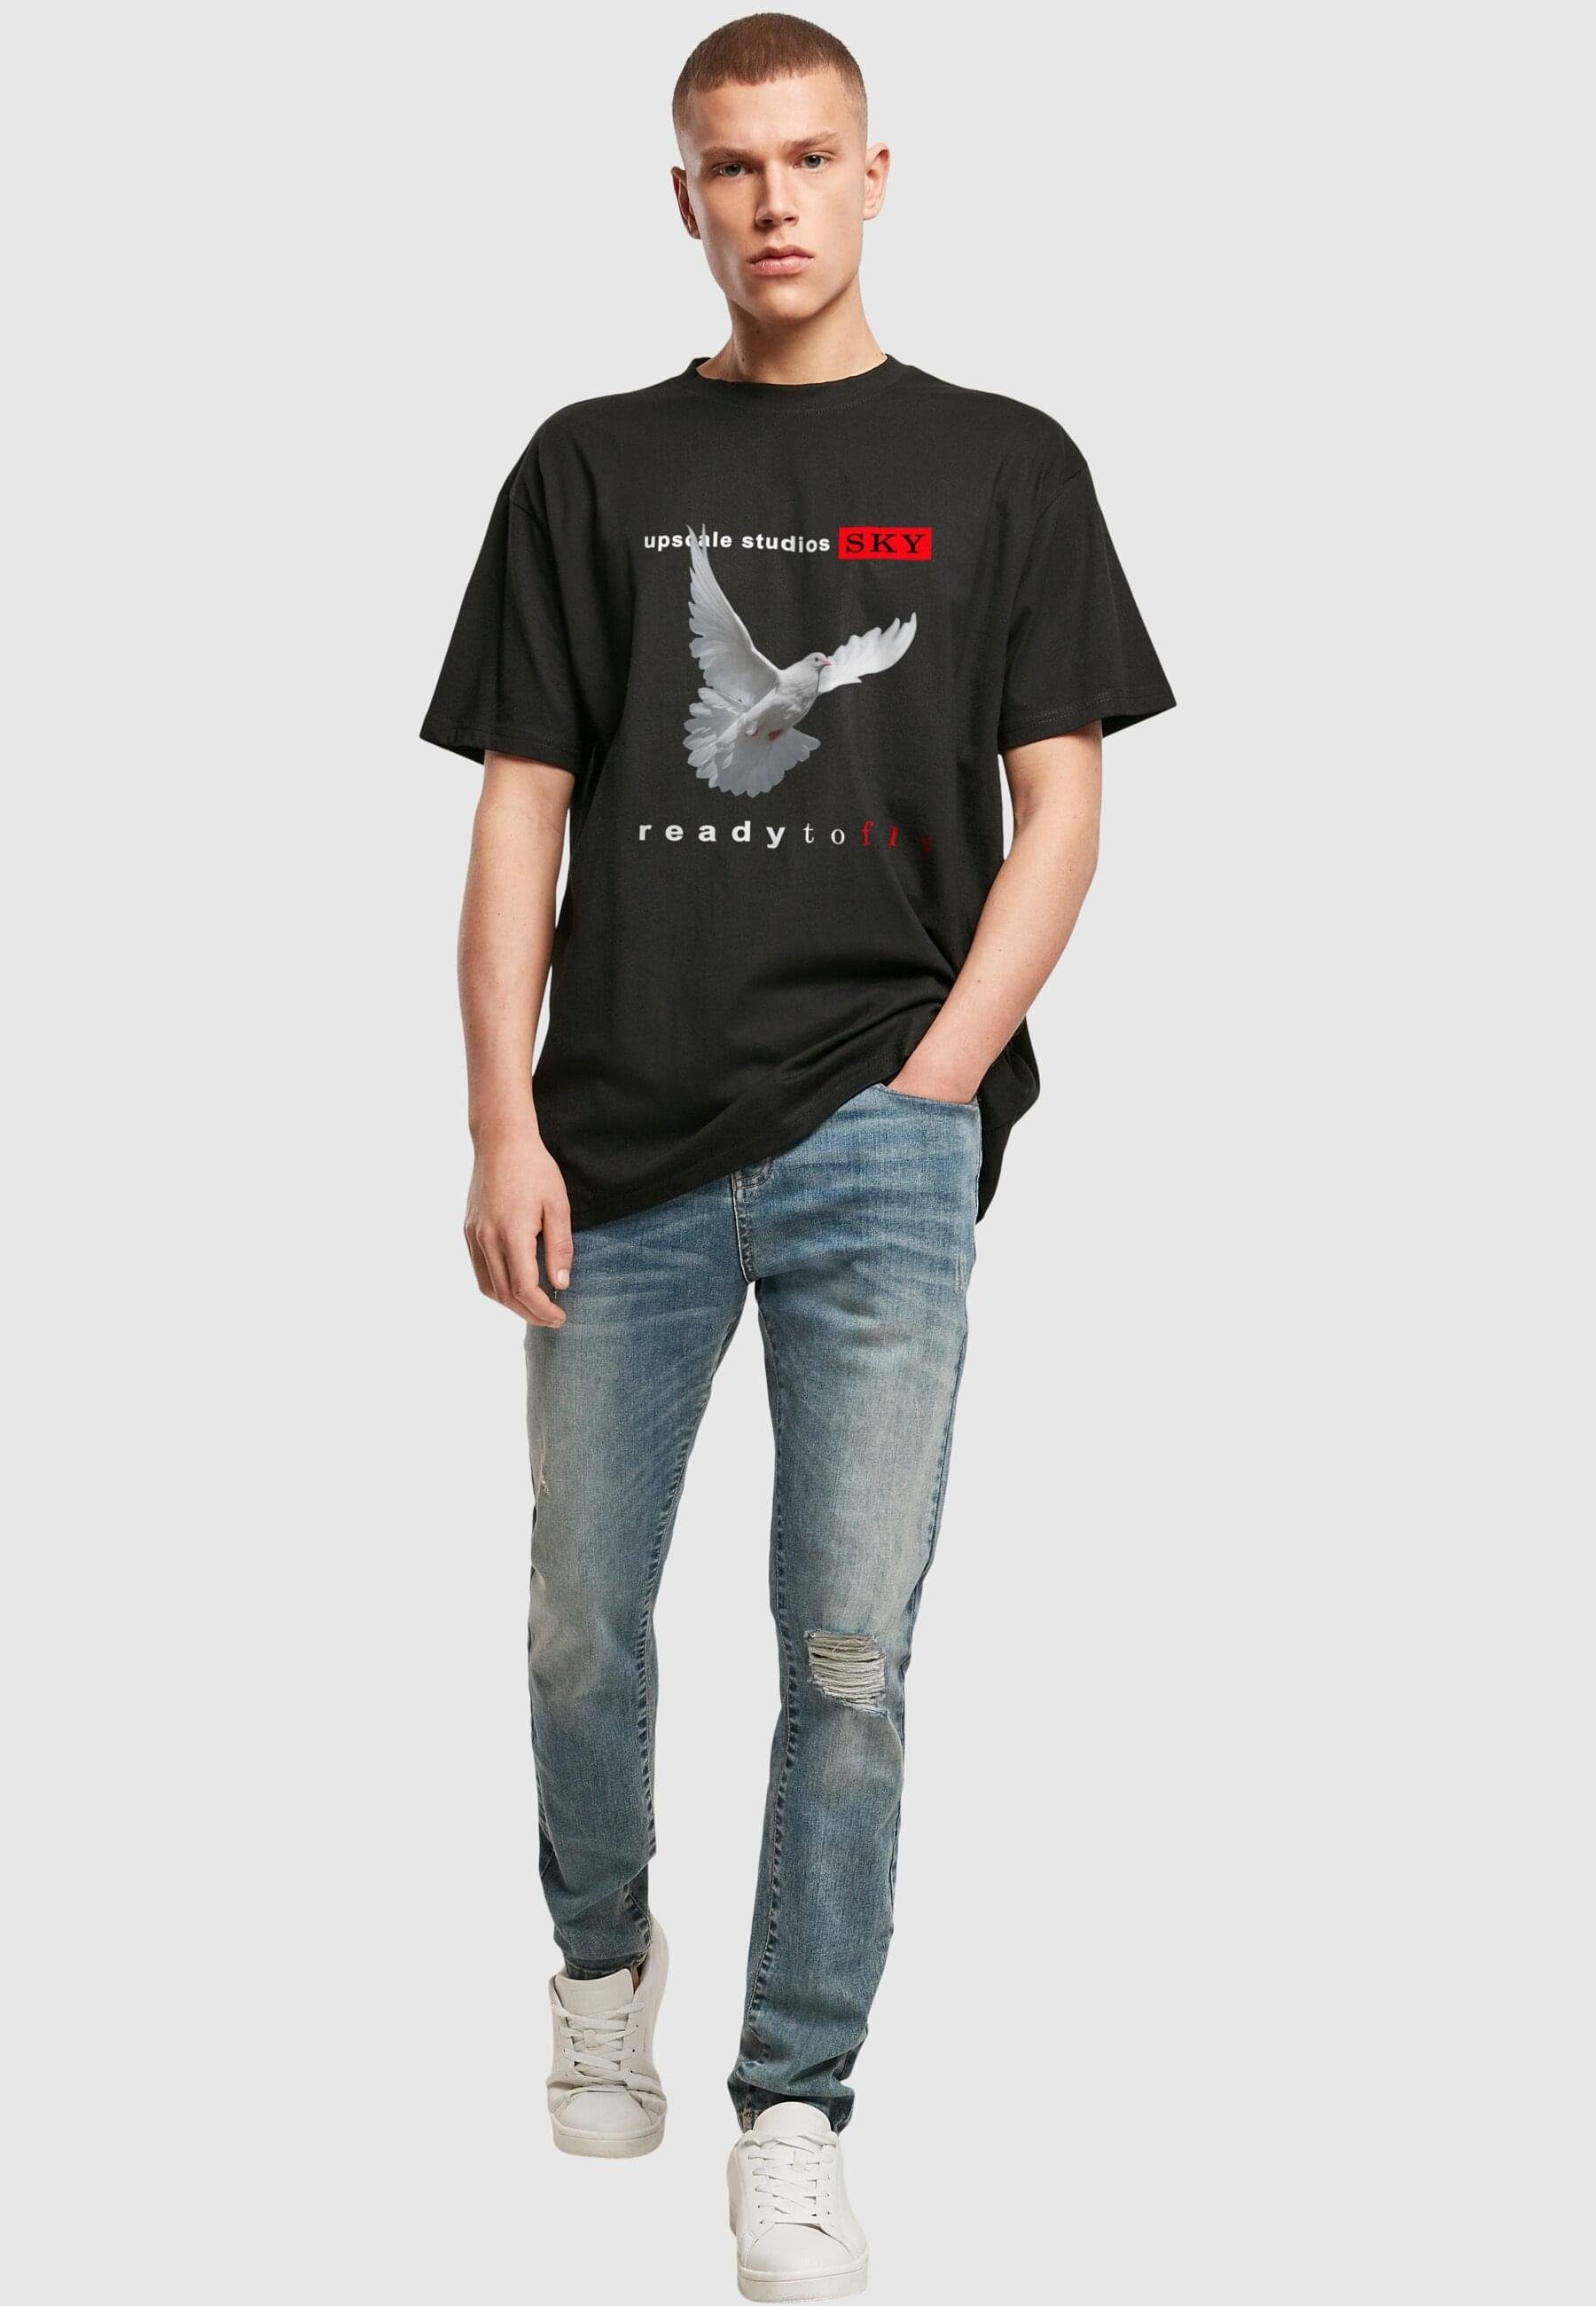 Tee (1-tlg) black Ready Mister to fly T-Shirt Upscale Oversize by Unisex Tee